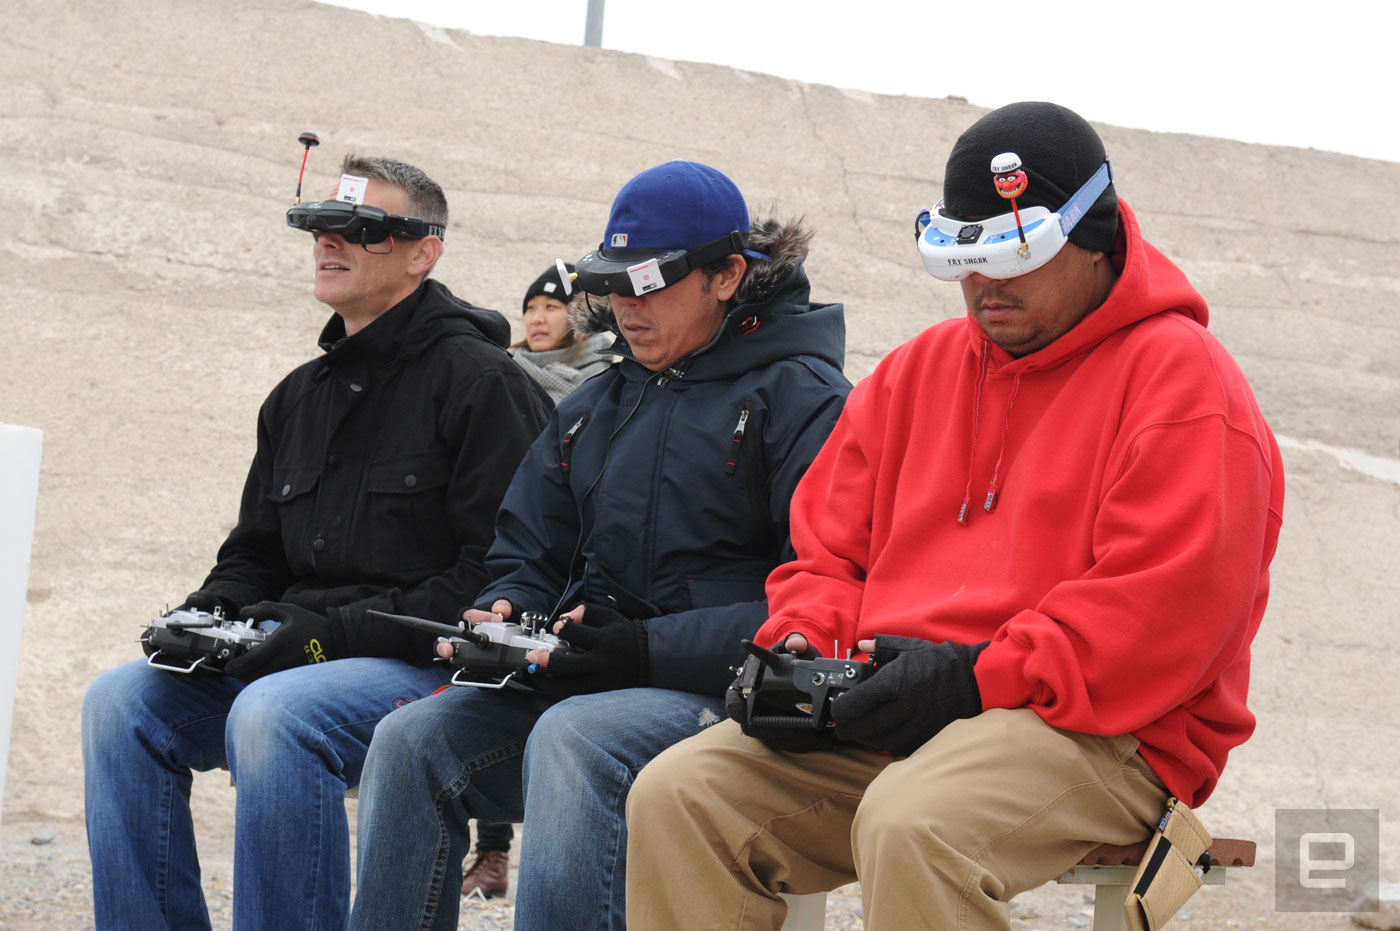 What goes down at a Vegas drone rodeo?